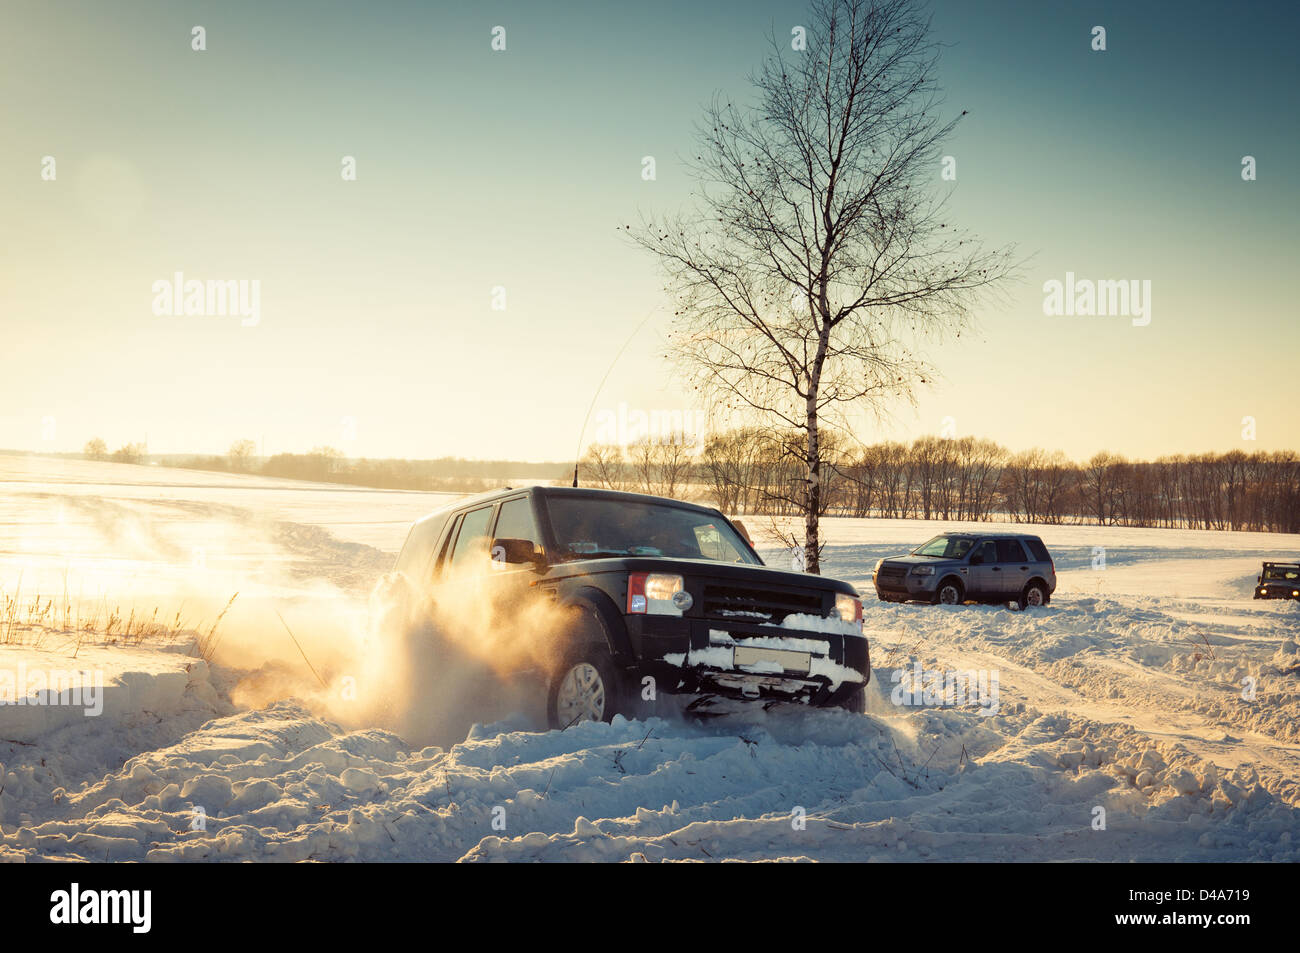 Land Rover Discovery Stockfoto